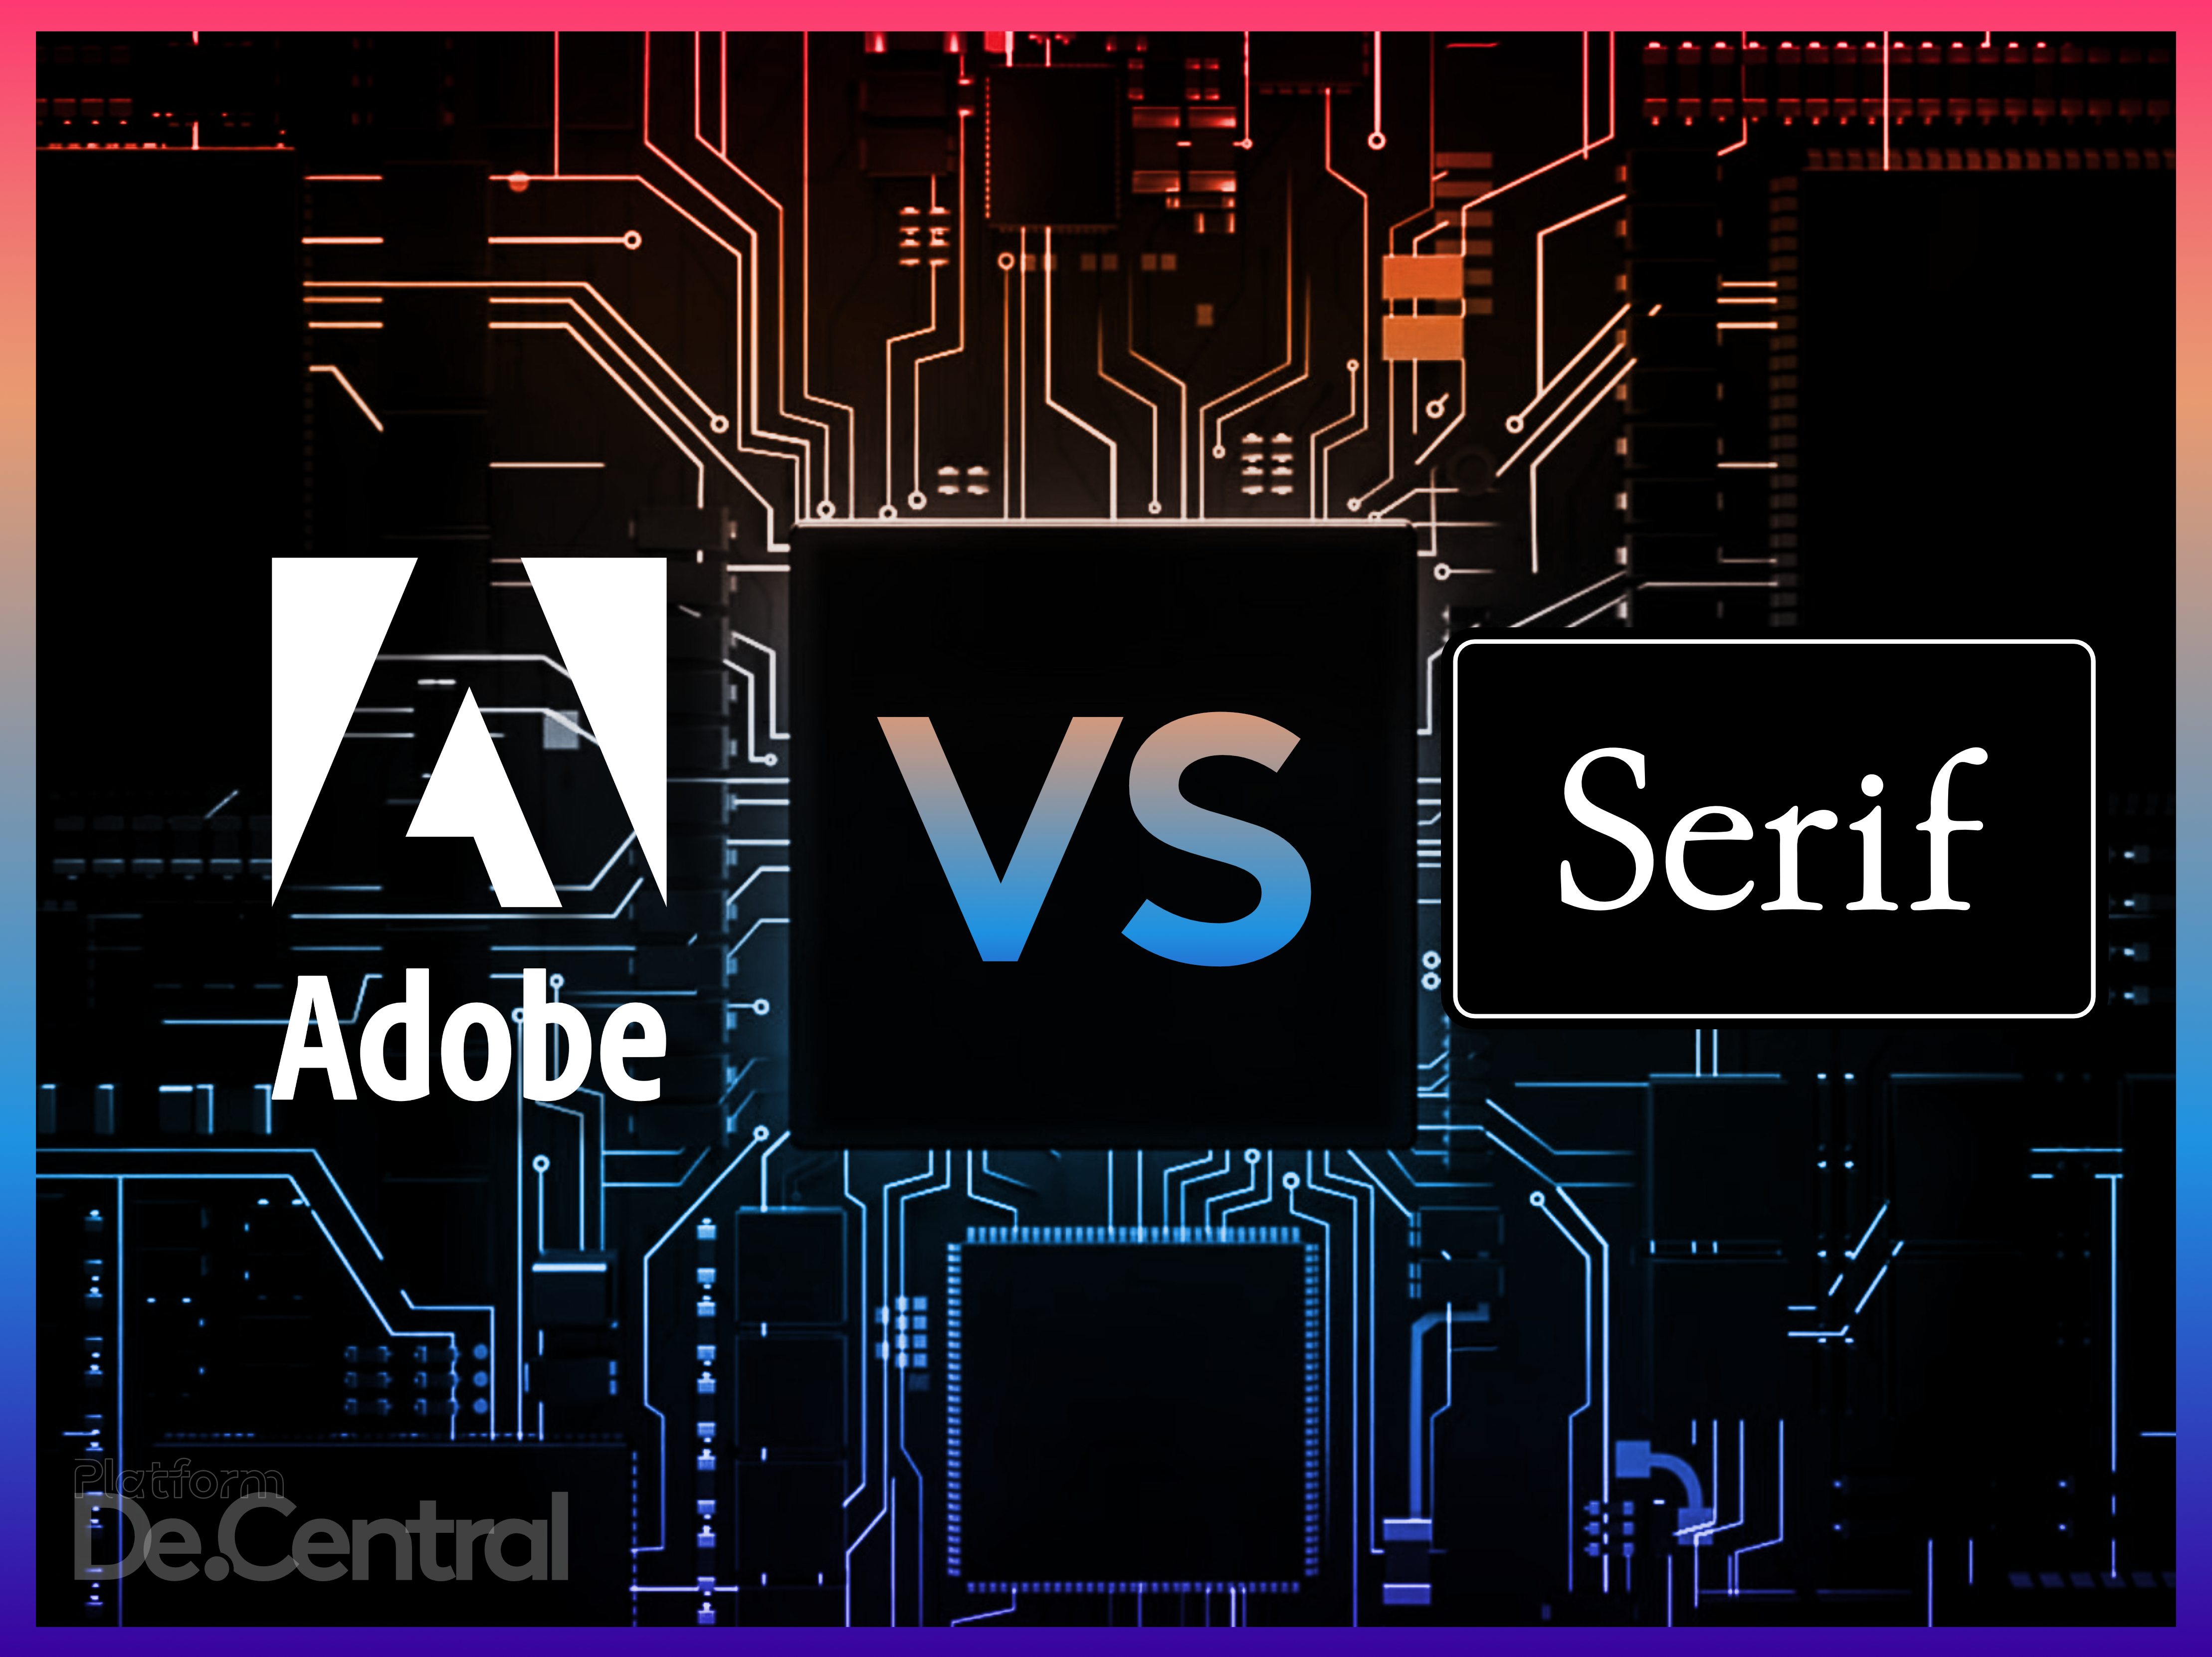 Adobe is delivering ARM-optimized apps for PC’s and Macs while Serif is falls behind